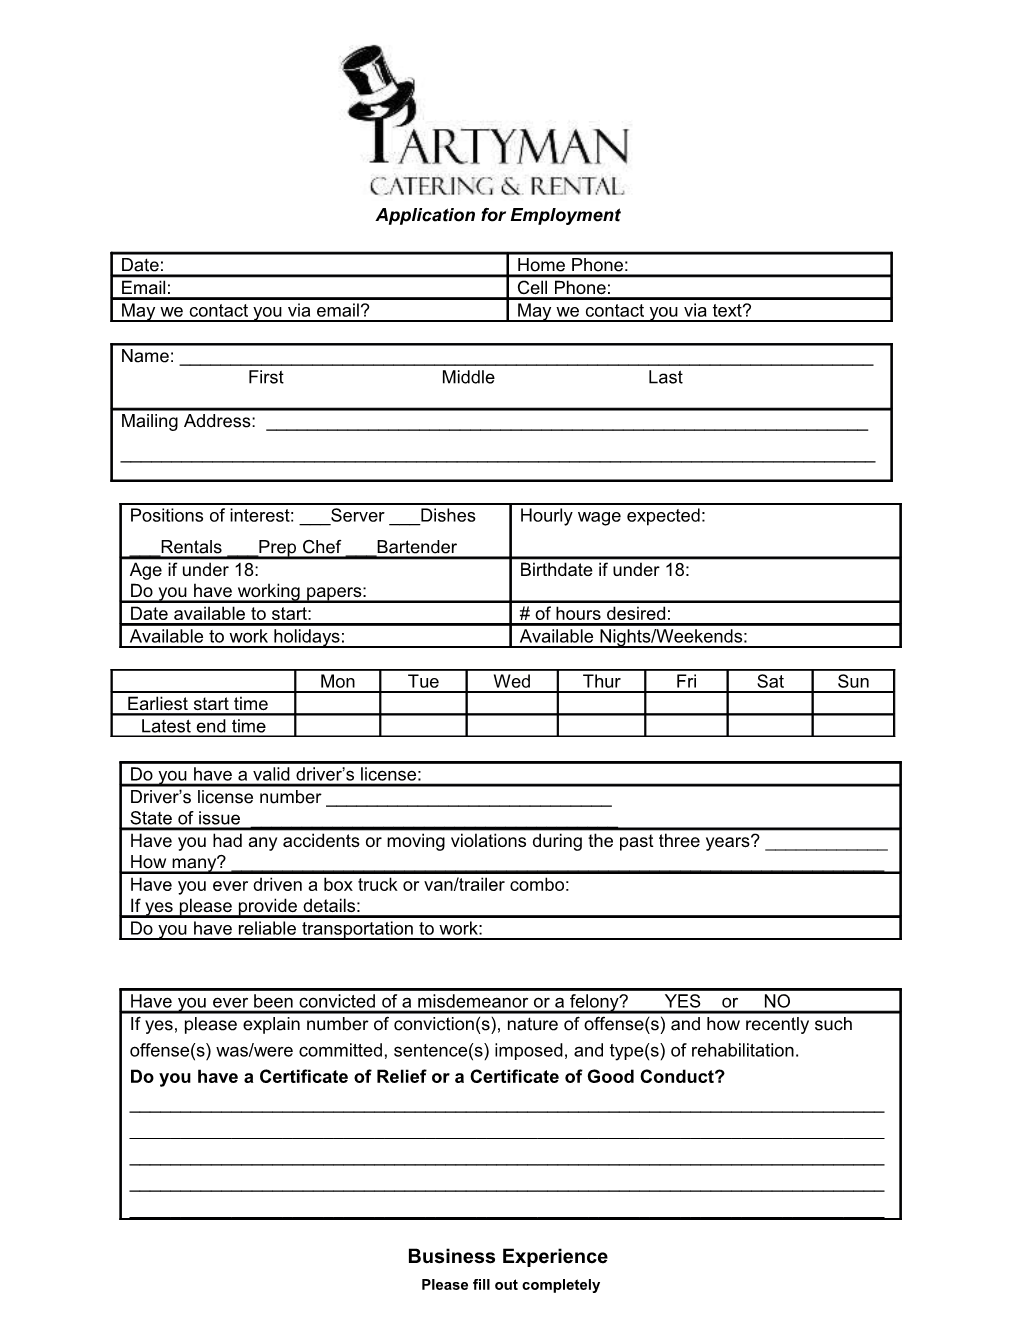 Please Fill out Completely